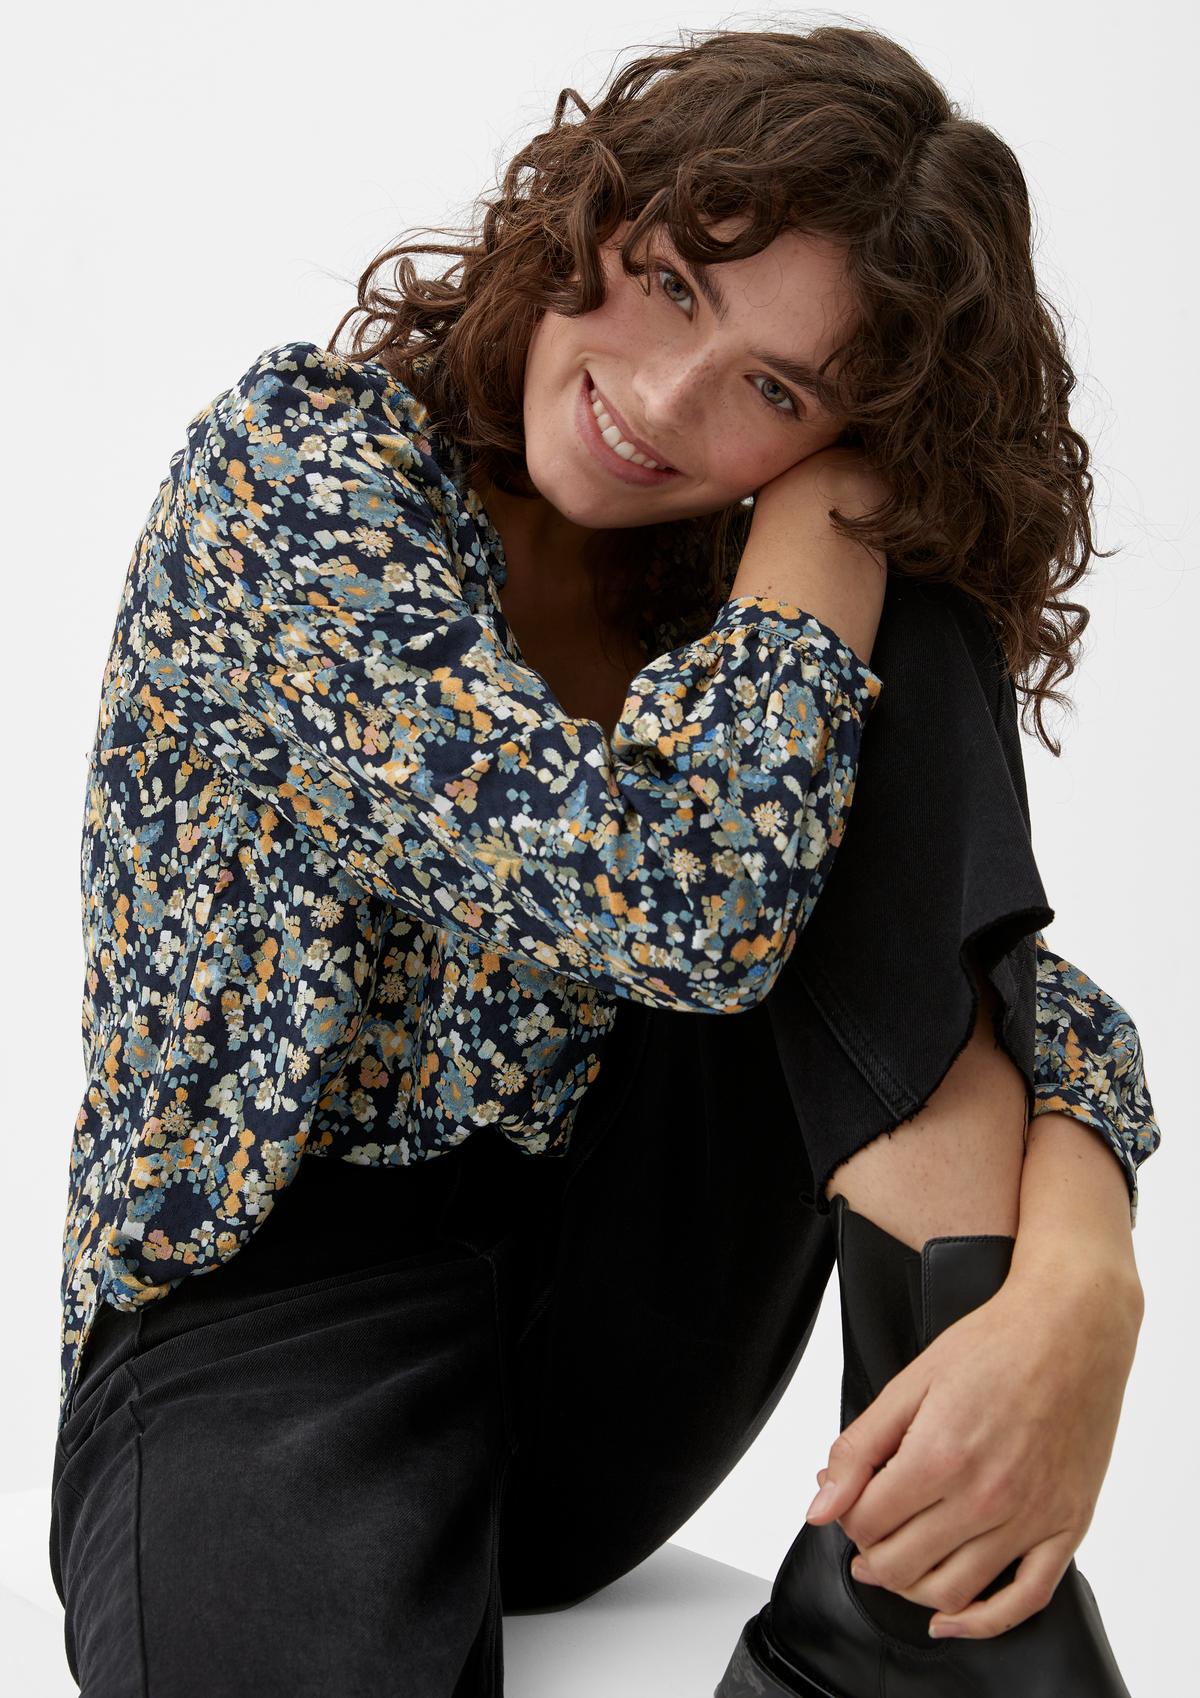 s.Oliver Tunic blouse with an all-over print